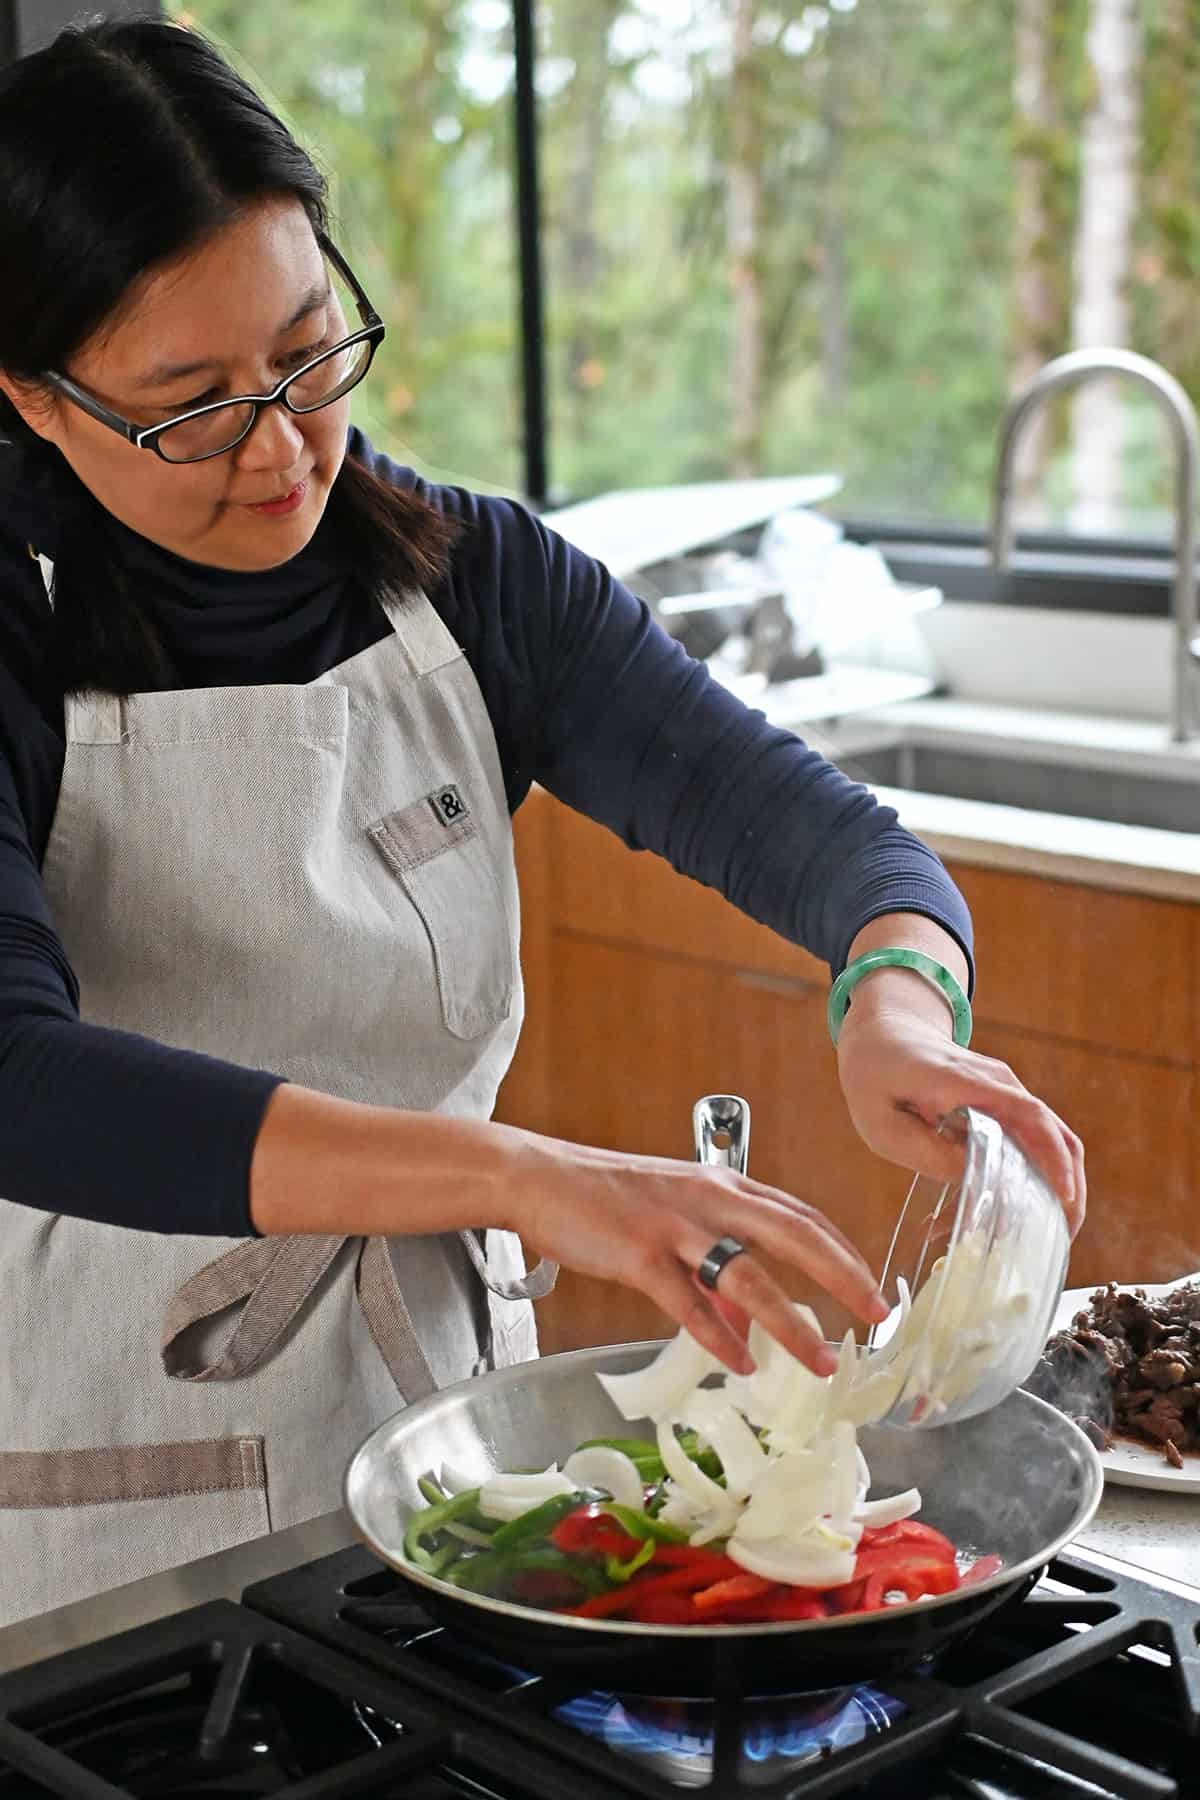 An Asian woman in glasses and braids is adding sliced onions to a hot skillet filled with sliced red and green bell peppers.